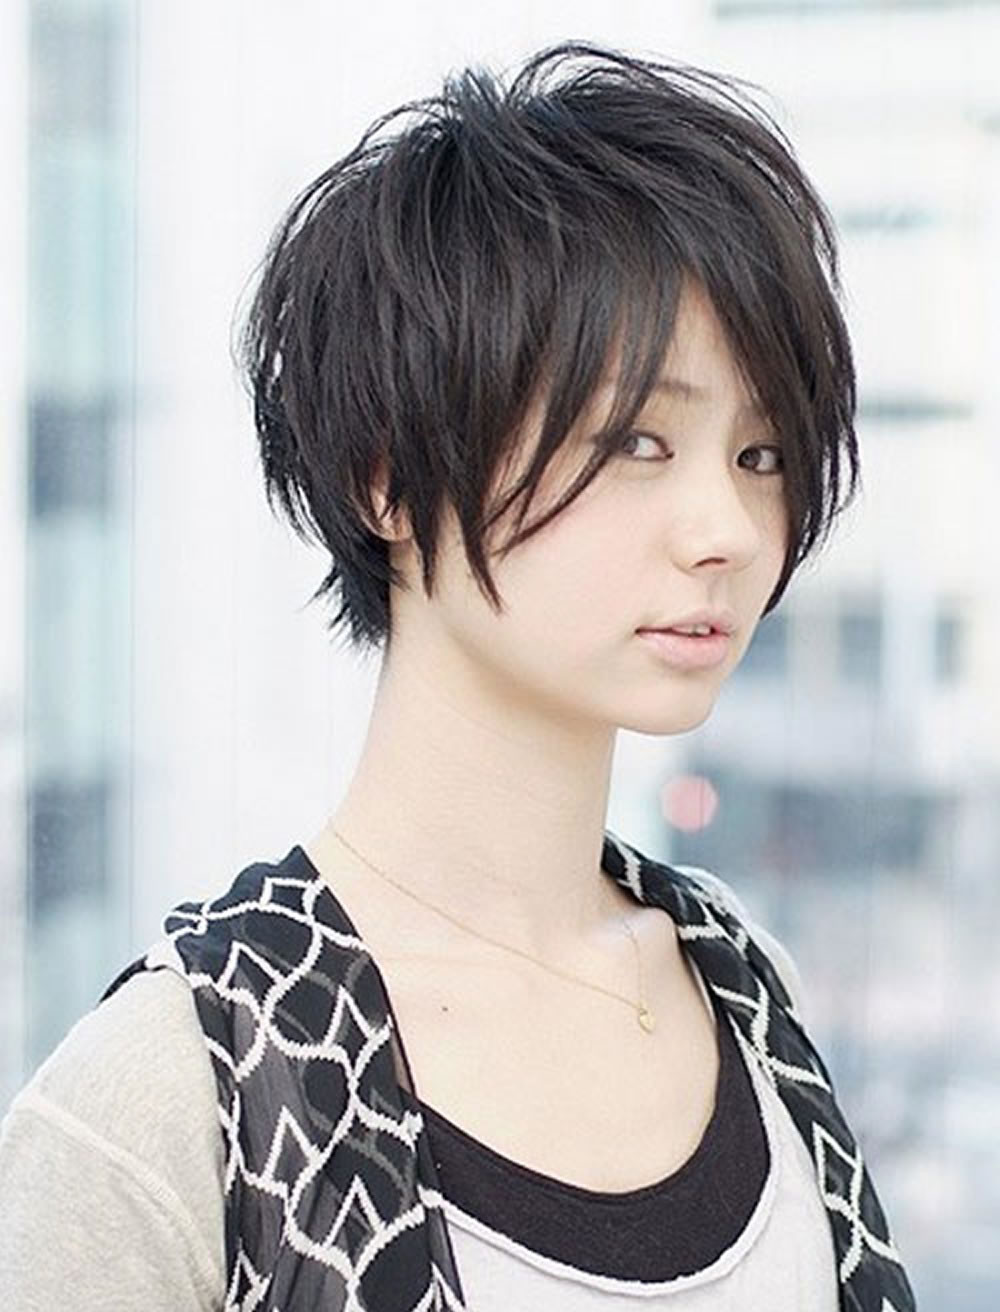 Medium Asian Hairstyle
 50 Glorious Short Hairstyles for Asian Women for Summer